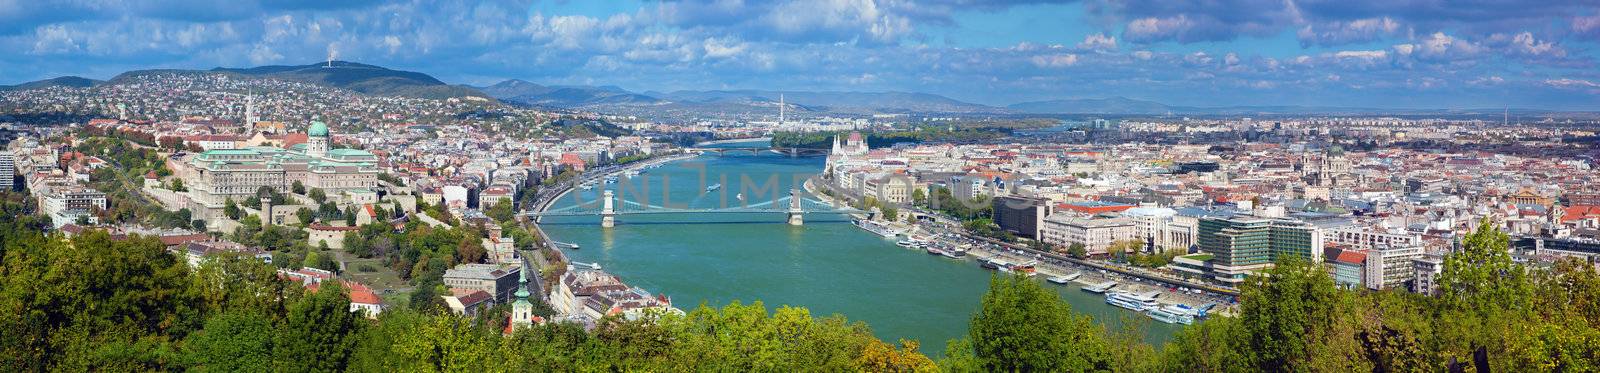 Budapest, Hungary. View from Gellert Hill by photocreo